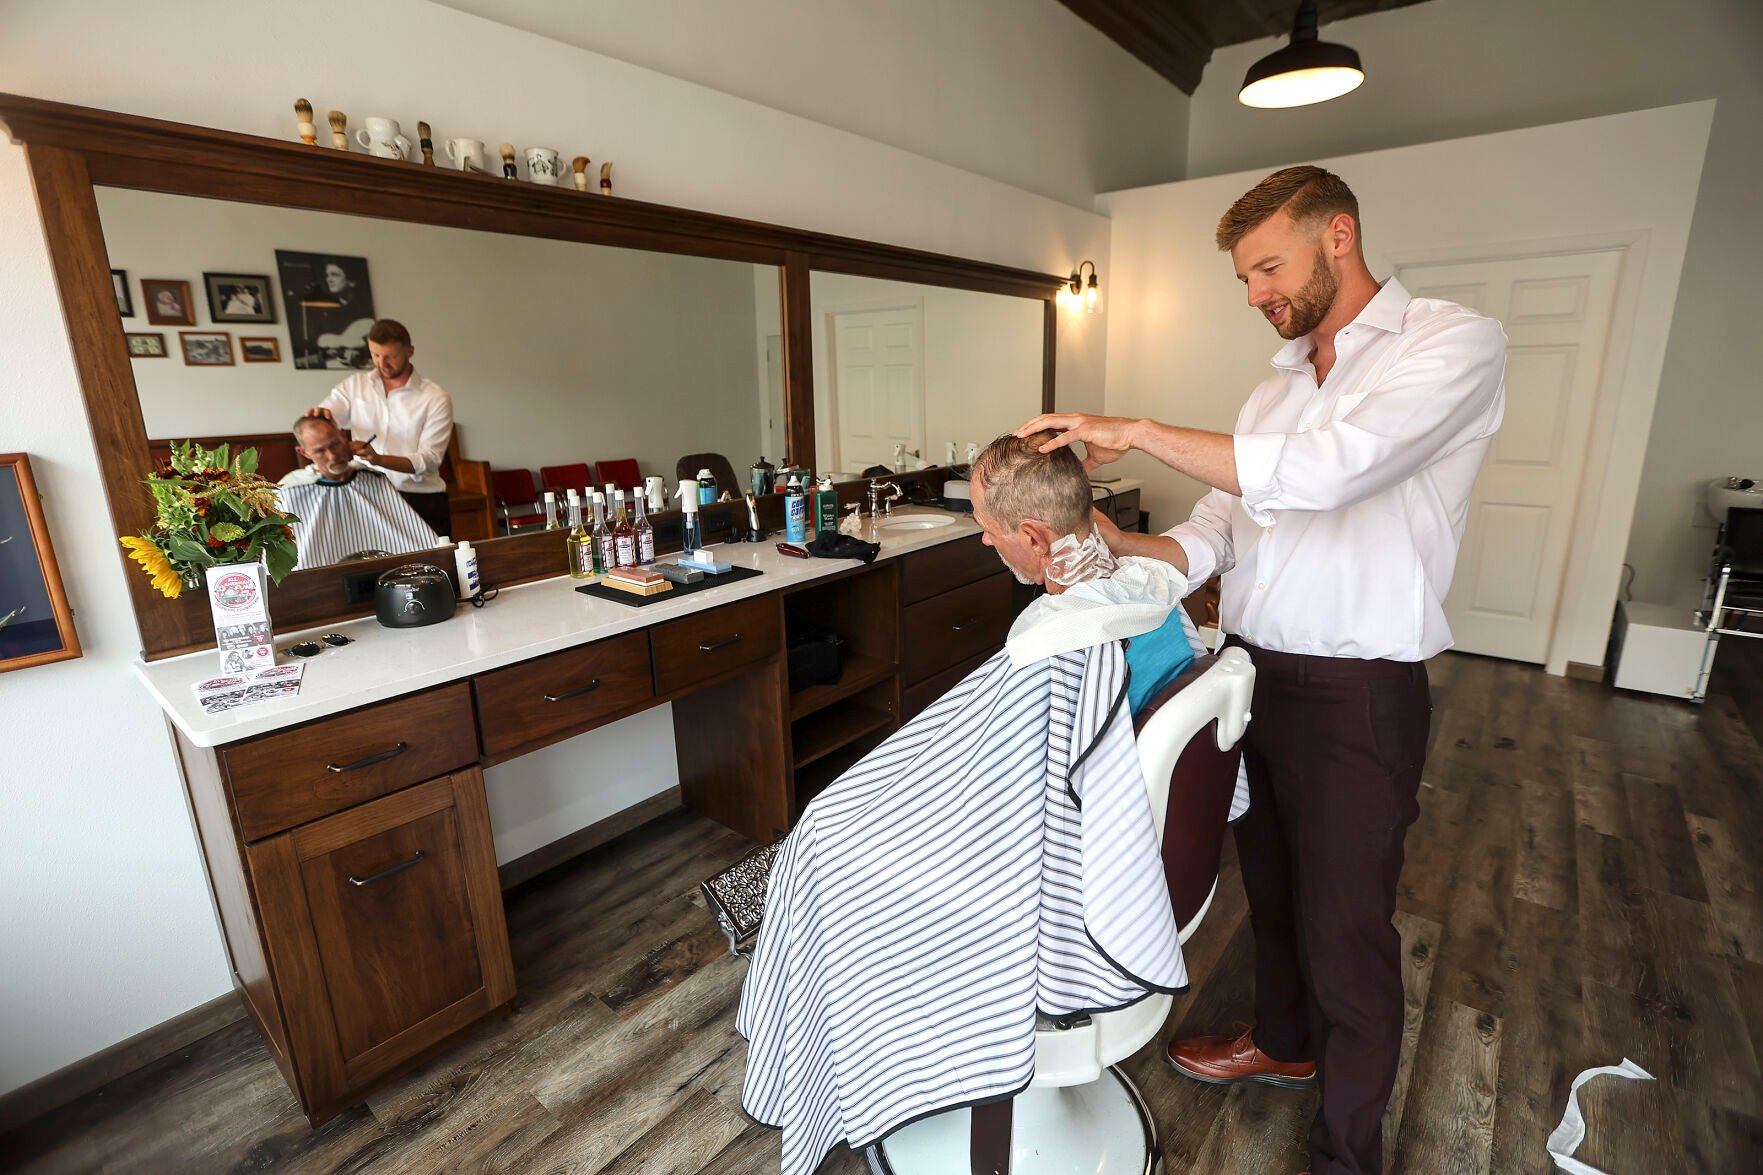 Owner of Traditions Barbershop Josh Smith works with customer Rob Kempf, of Manchester, Iowa, in his shop located at 113 East Main Street in Manchester.    PHOTO CREDIT: Dave Kettering